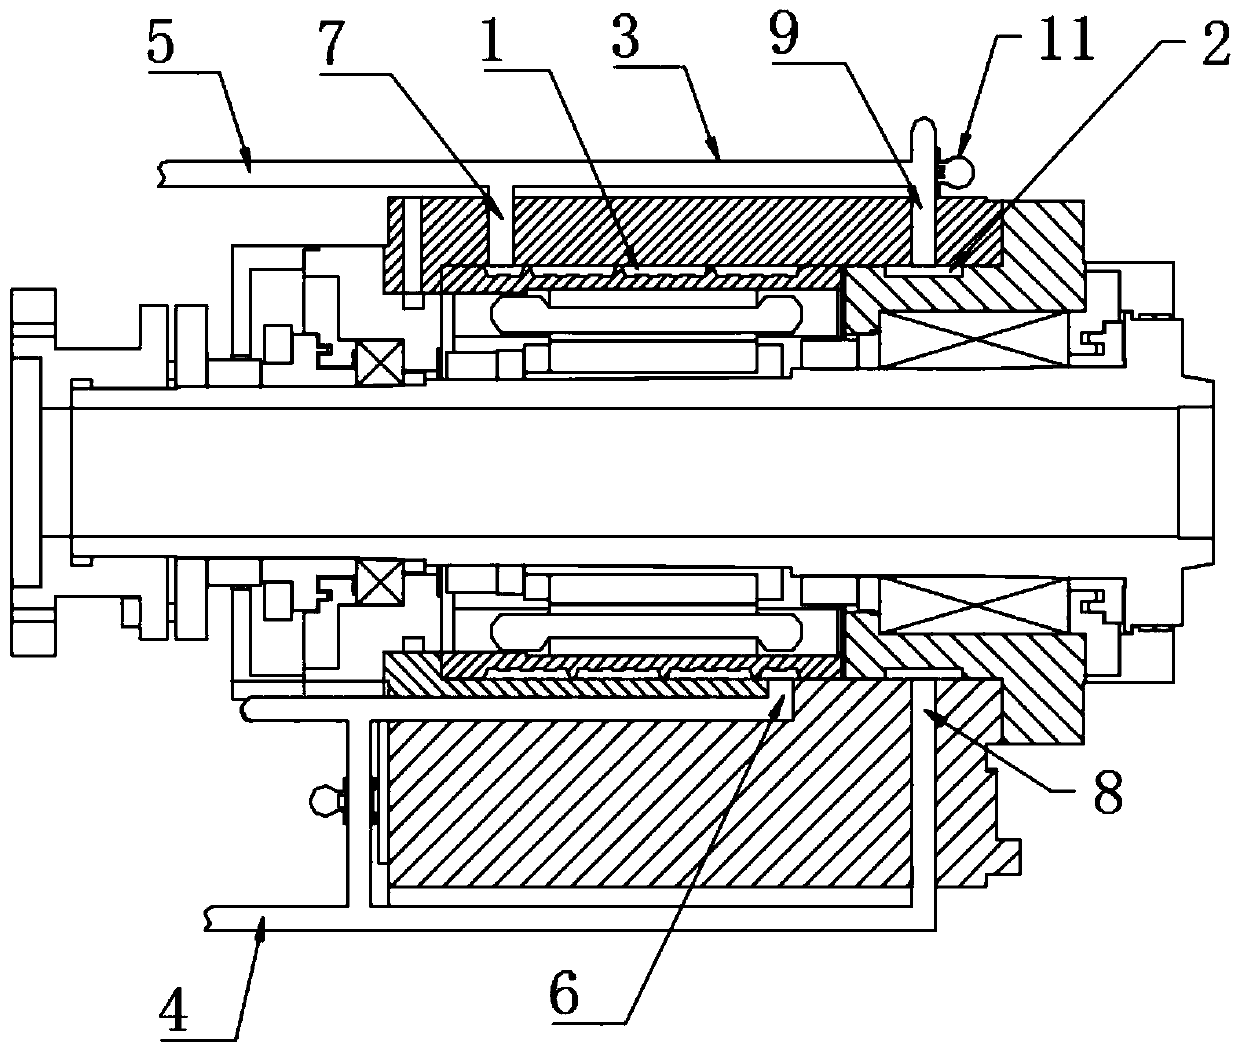 Cooling system, electric spindle and numerical control machine tool